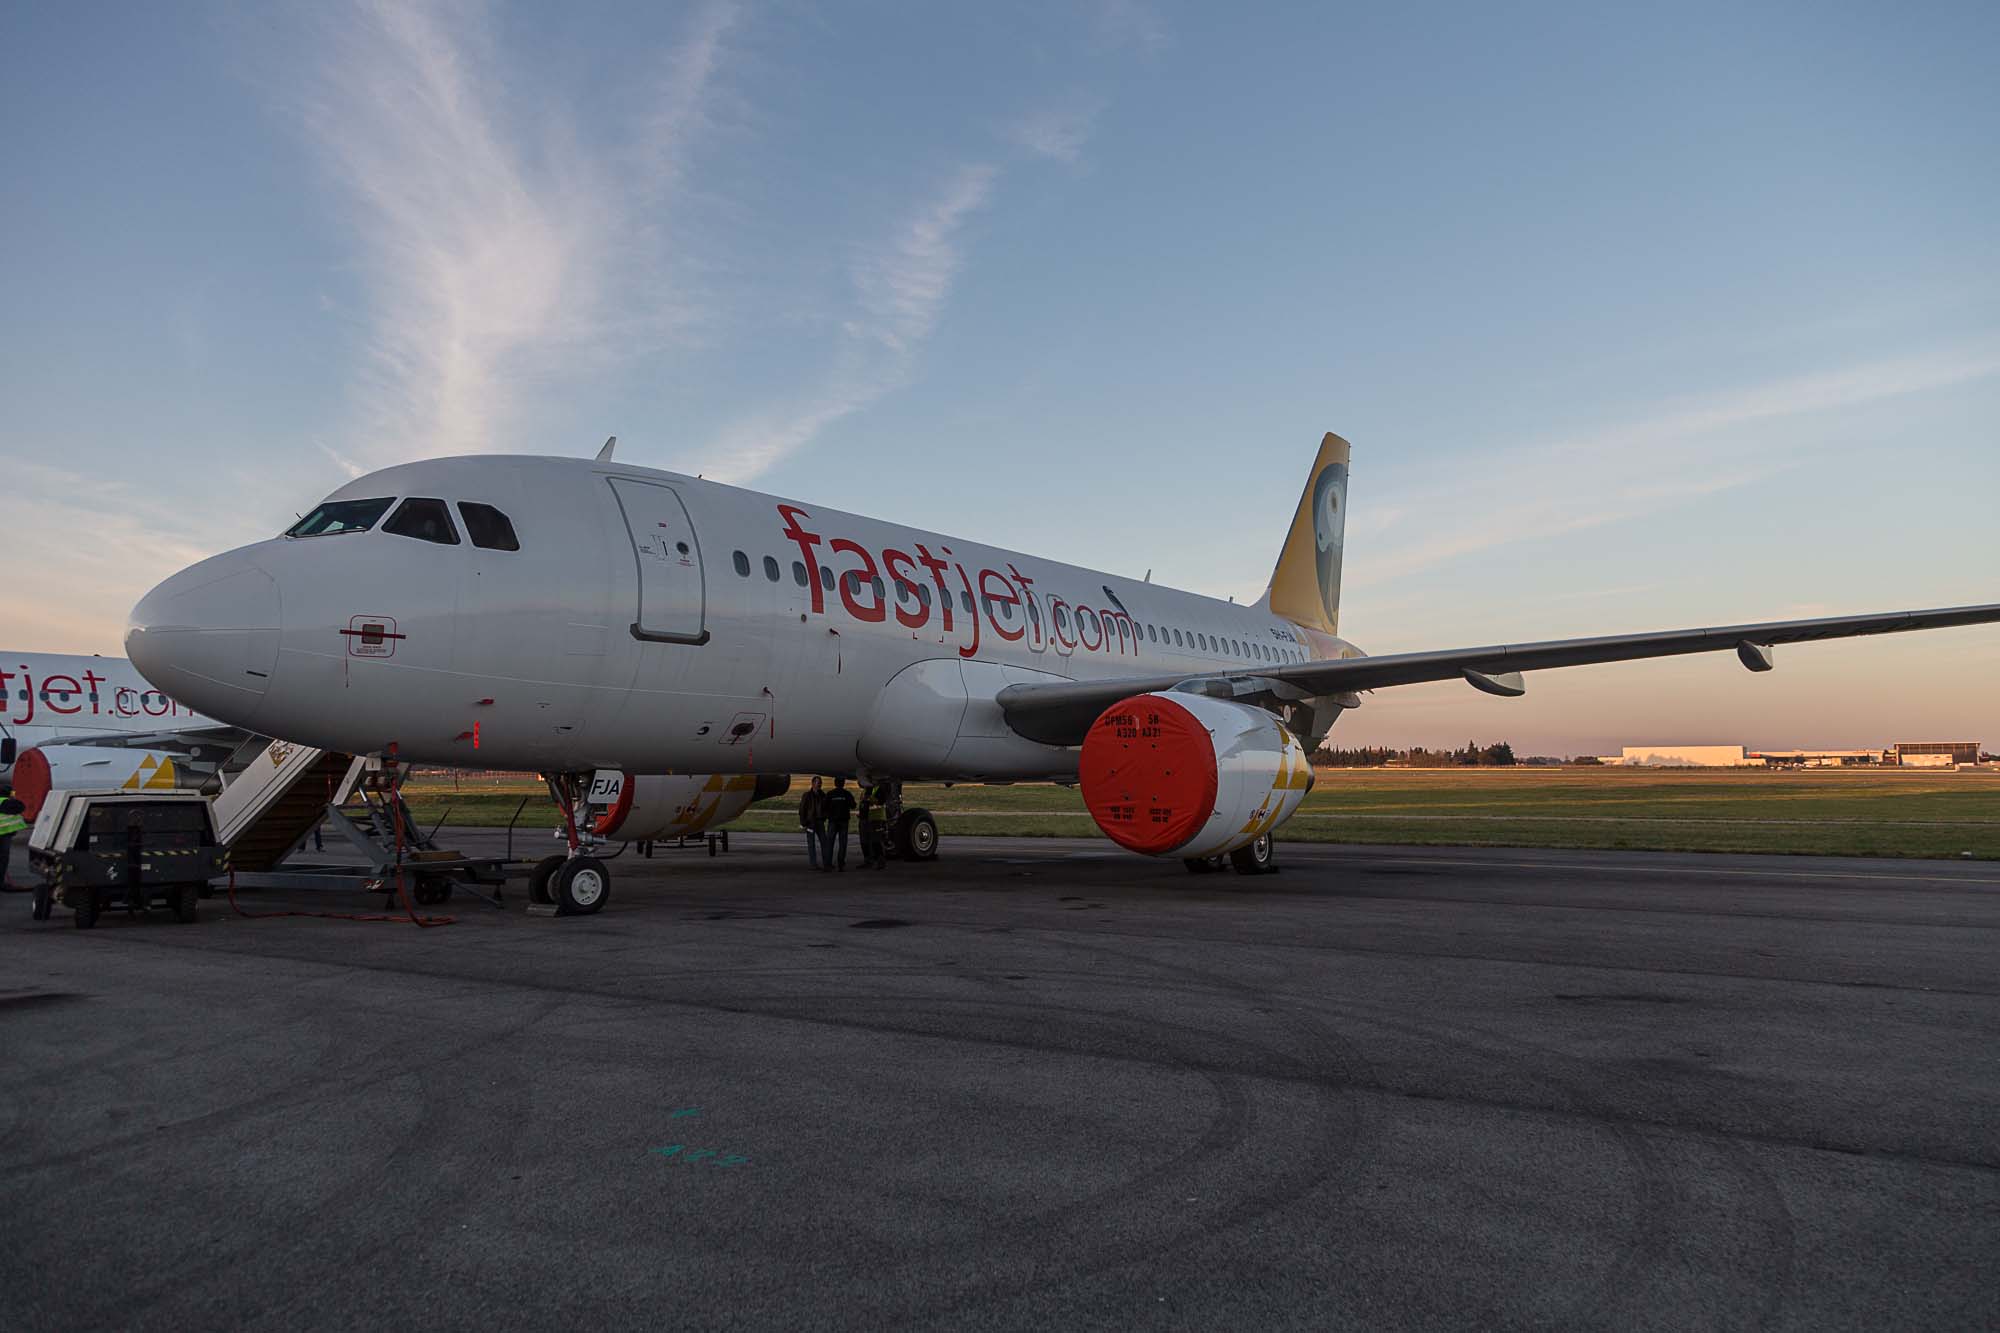 Fastjet’s revenue increases over 10 first months of 2019